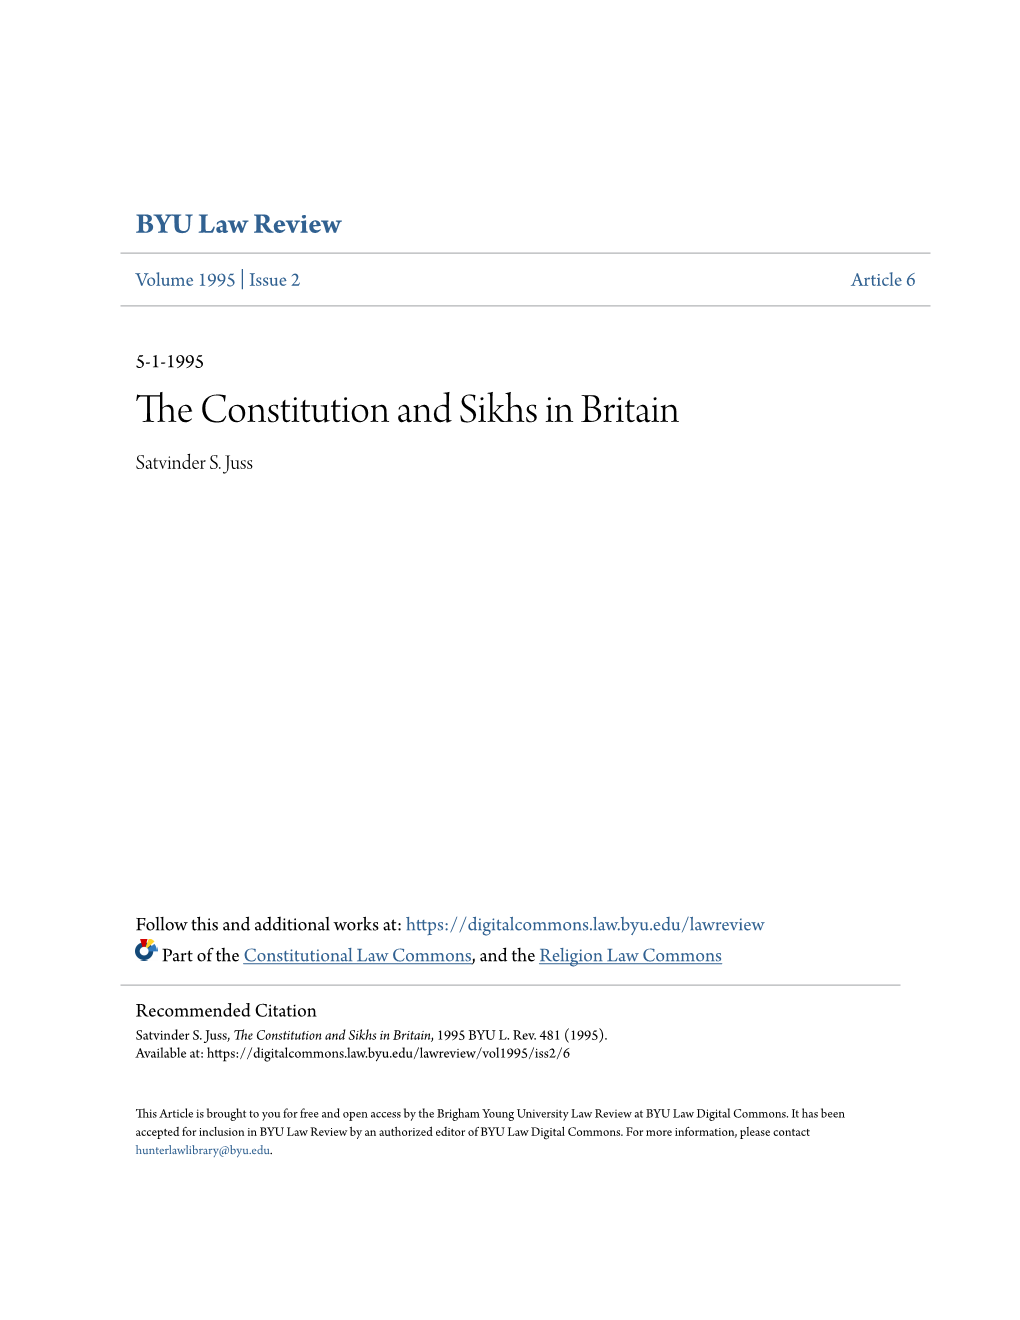 The Constitution and Sikhs in Britain, 1995 BYU L